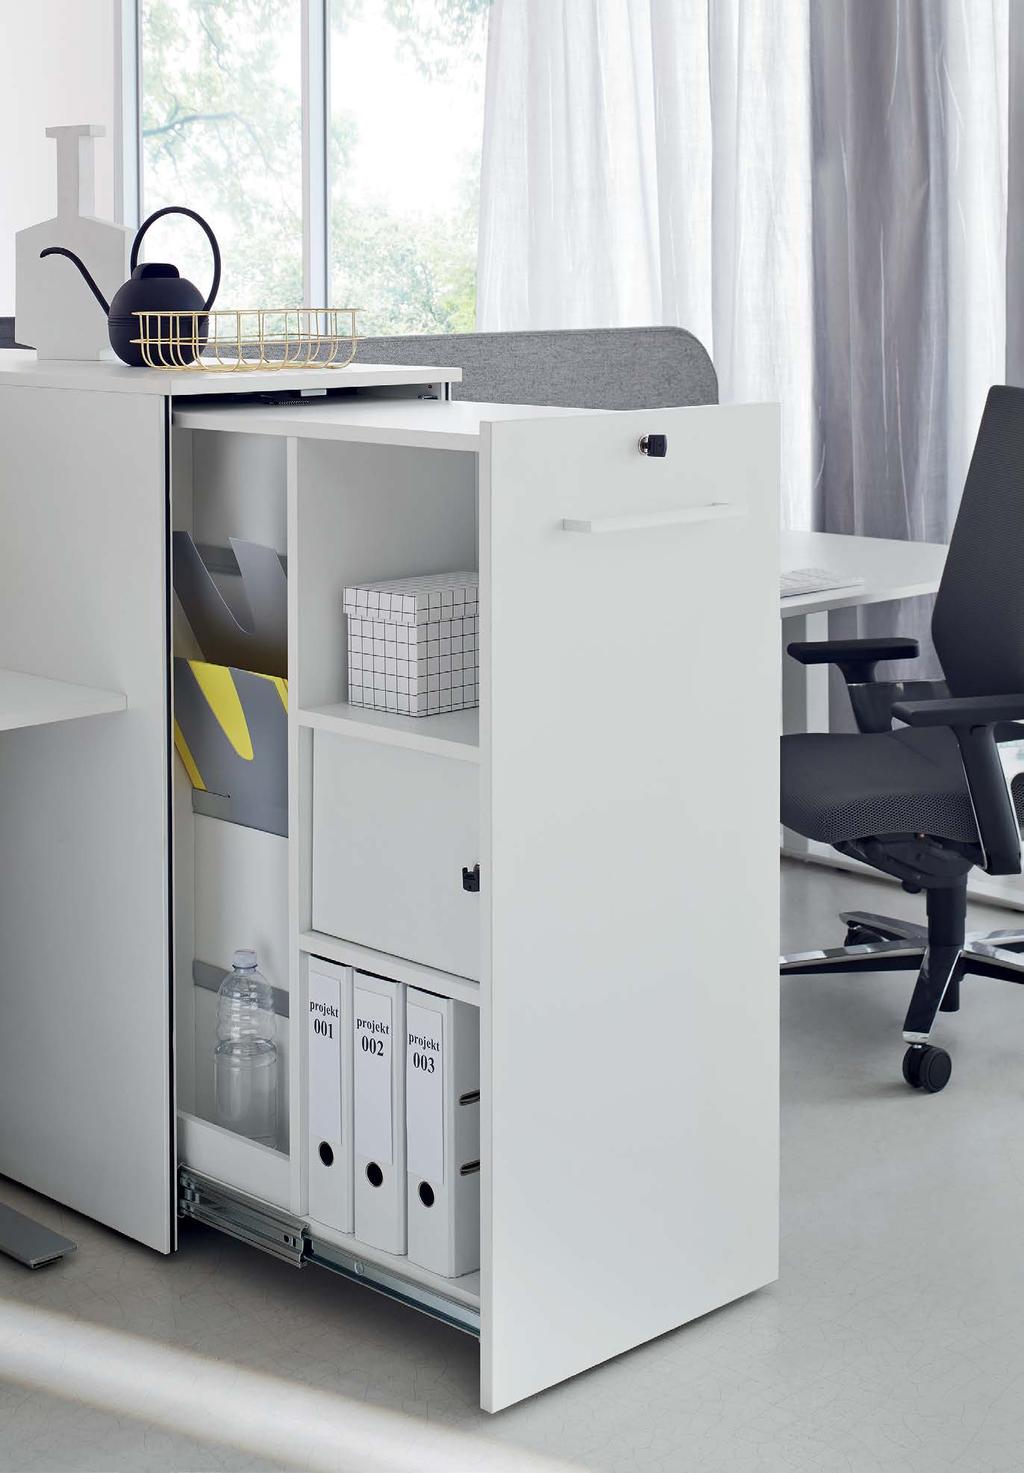 In the double garage variant for workstations that are arranged in blocks, orga.cube screens seamlessly and enables central attachment of an integrated workstation light for two or four workstations.